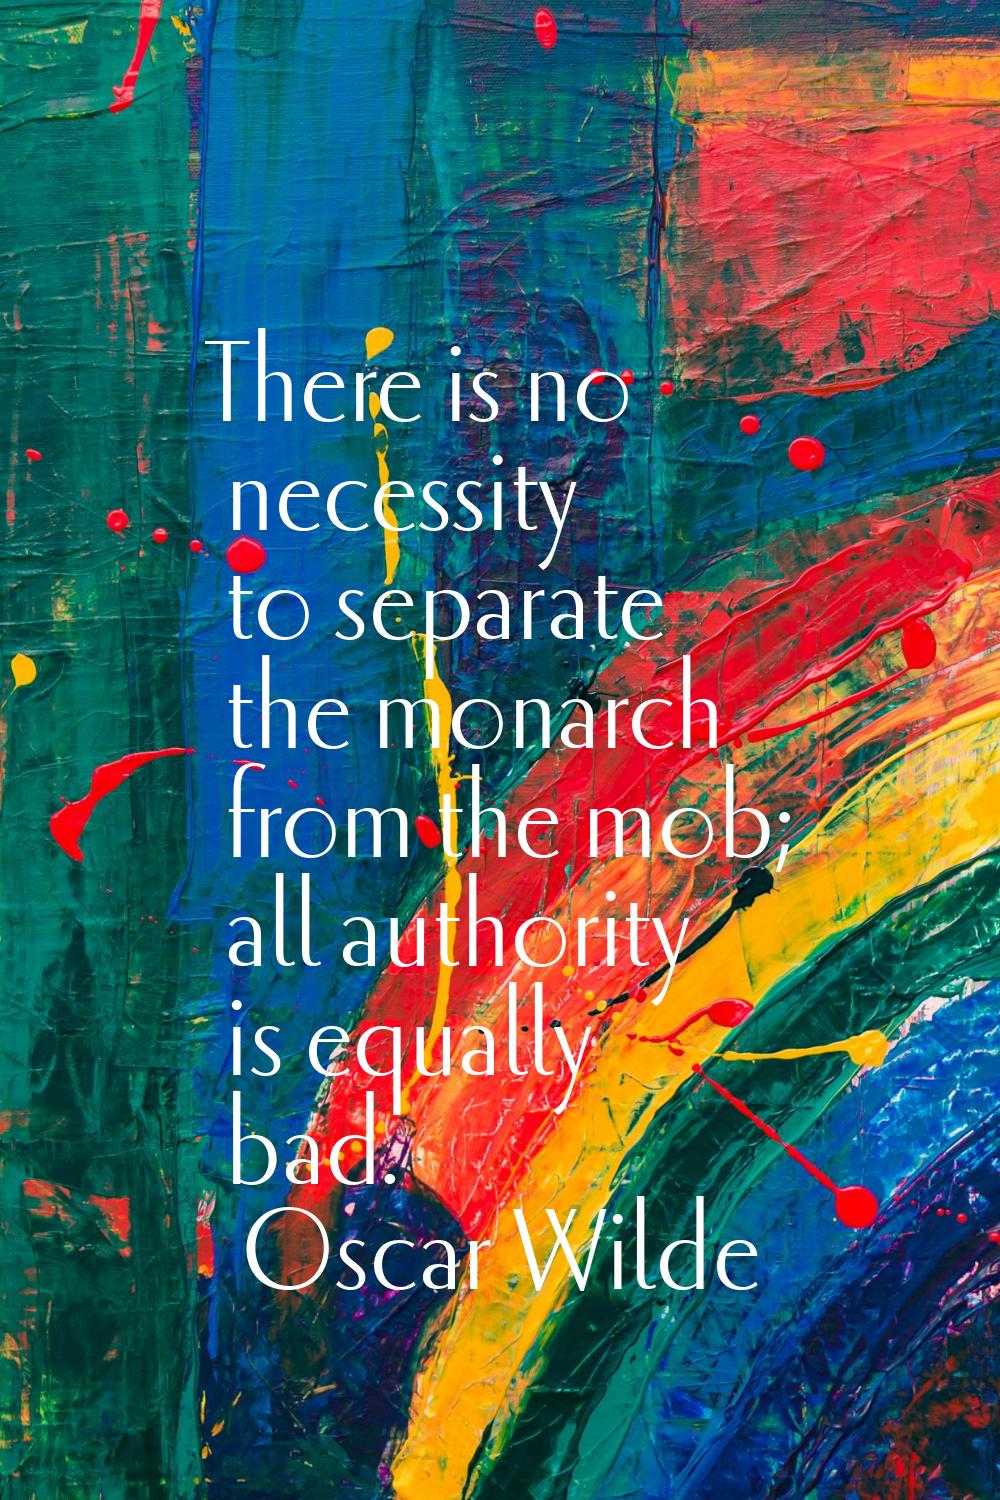 There is no necessity to separate the monarch from the mob; all authority is equally bad.